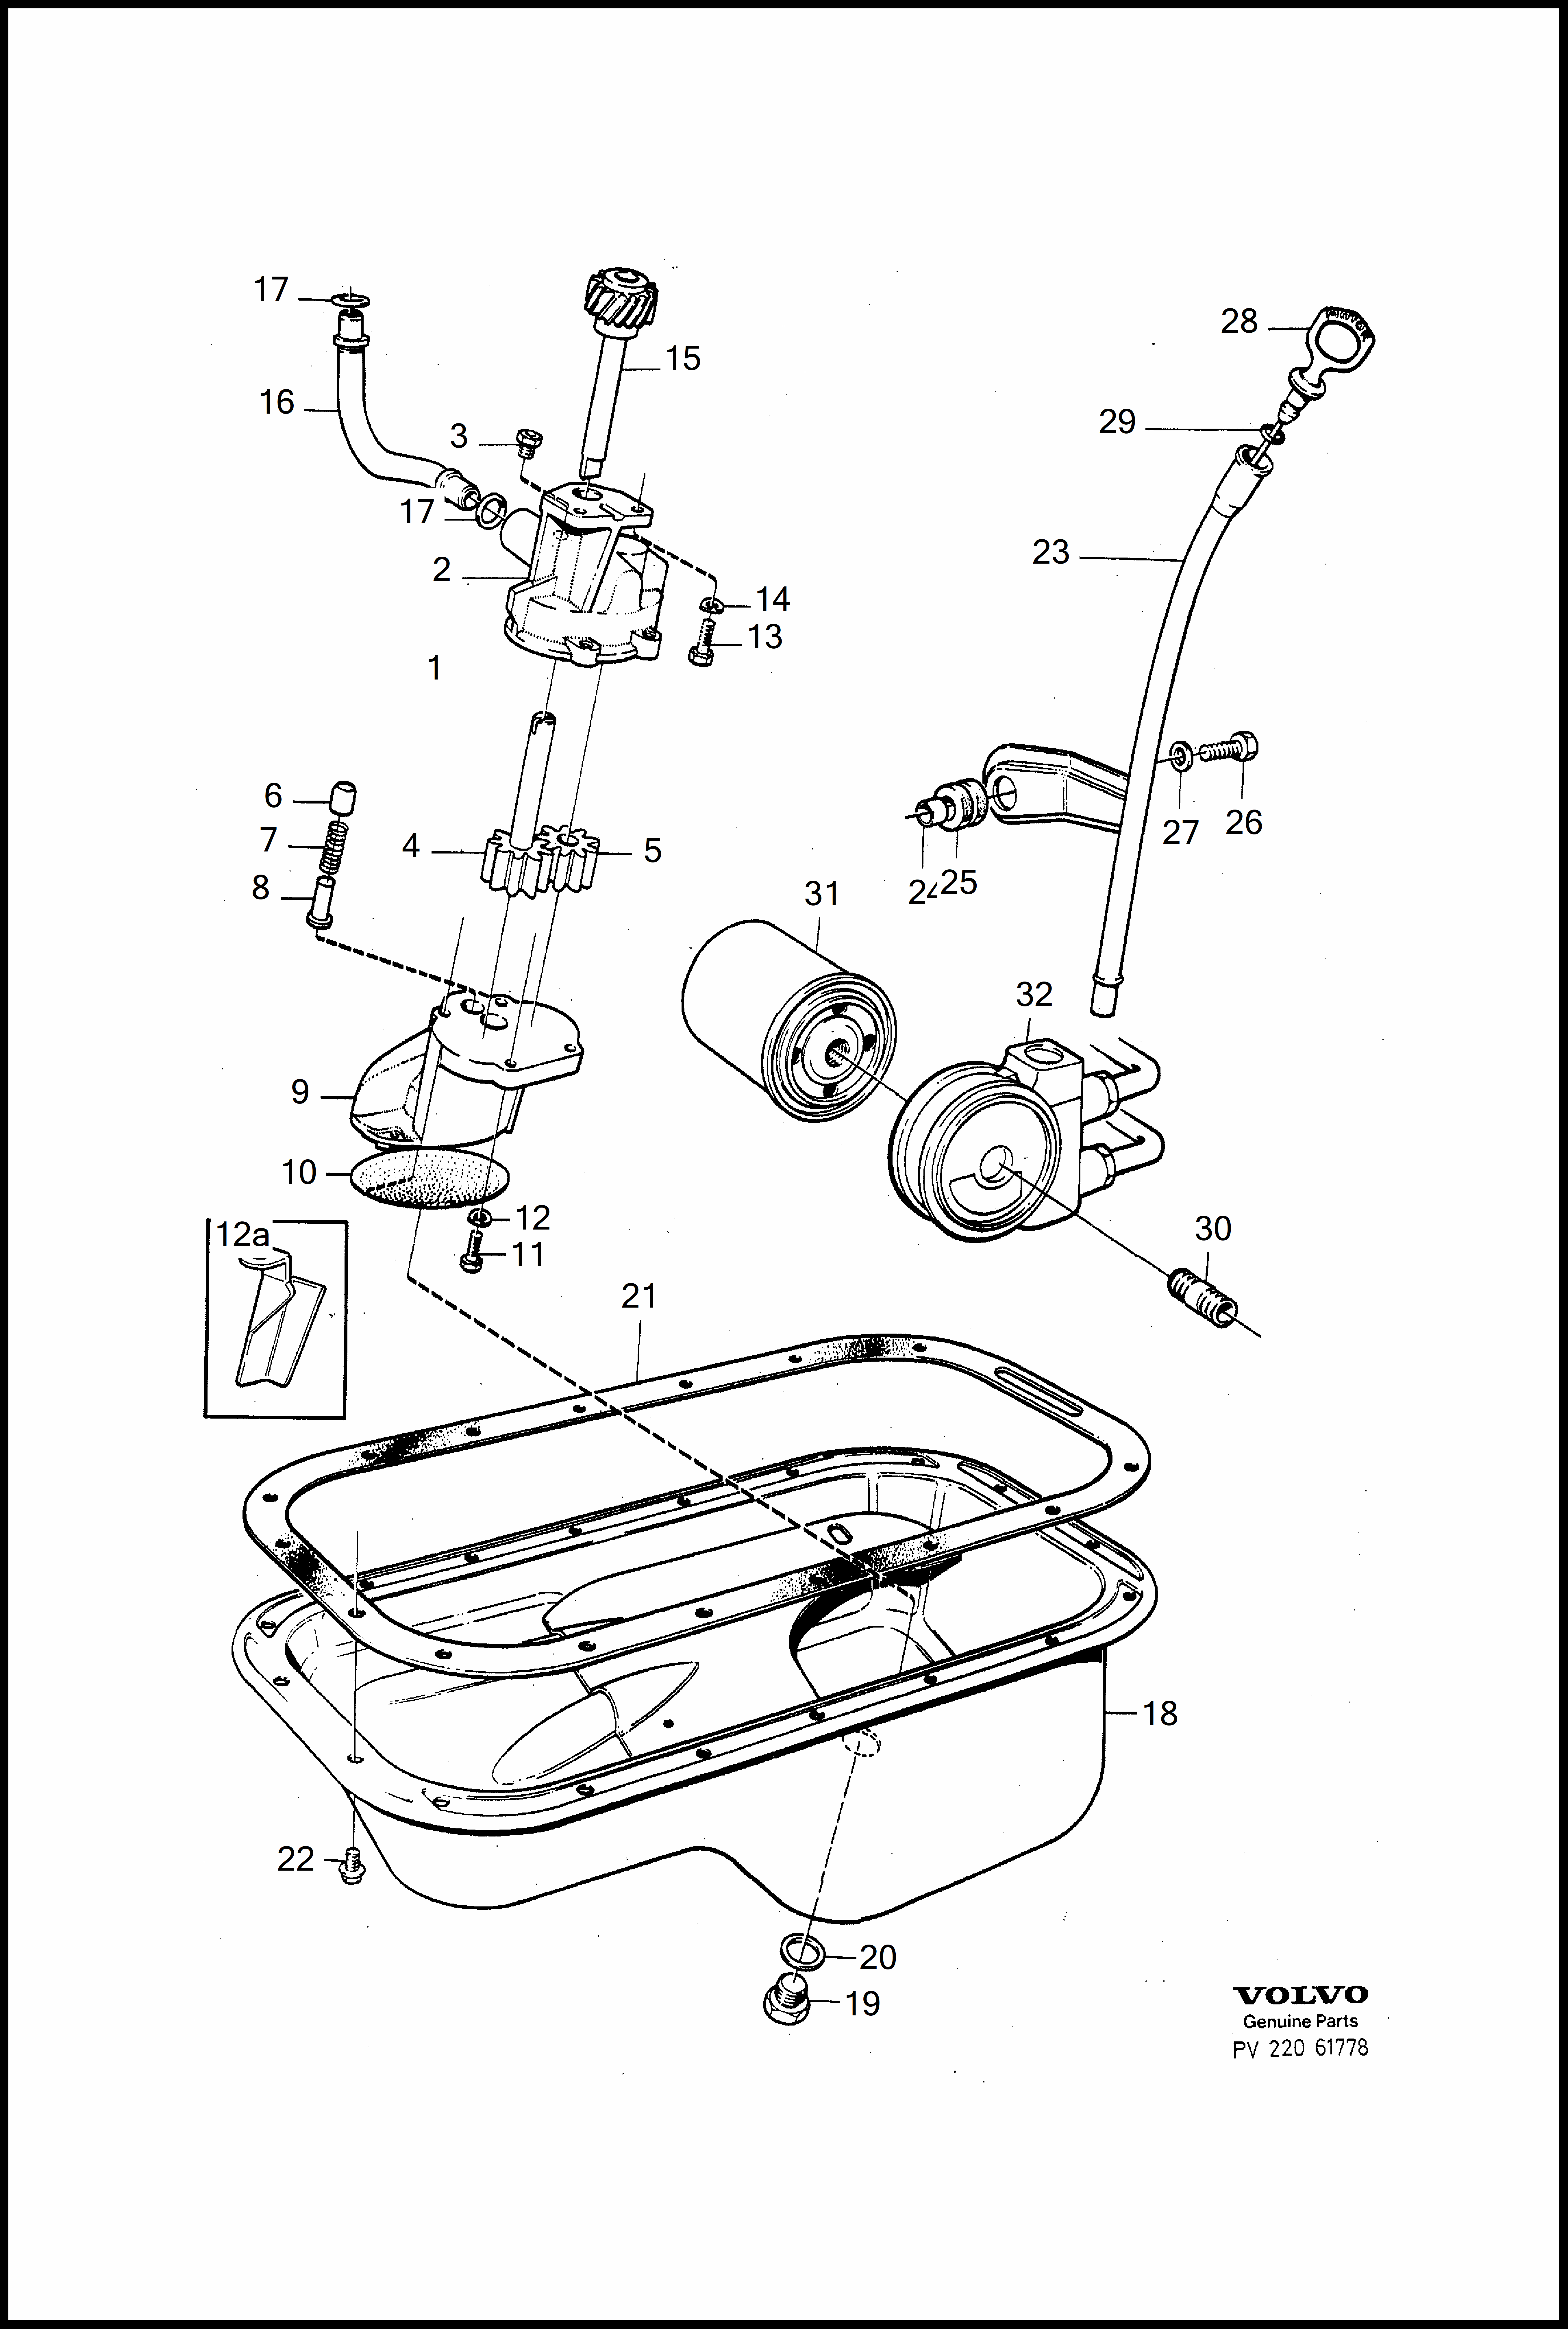 Lubricating system for Volvo 760 760